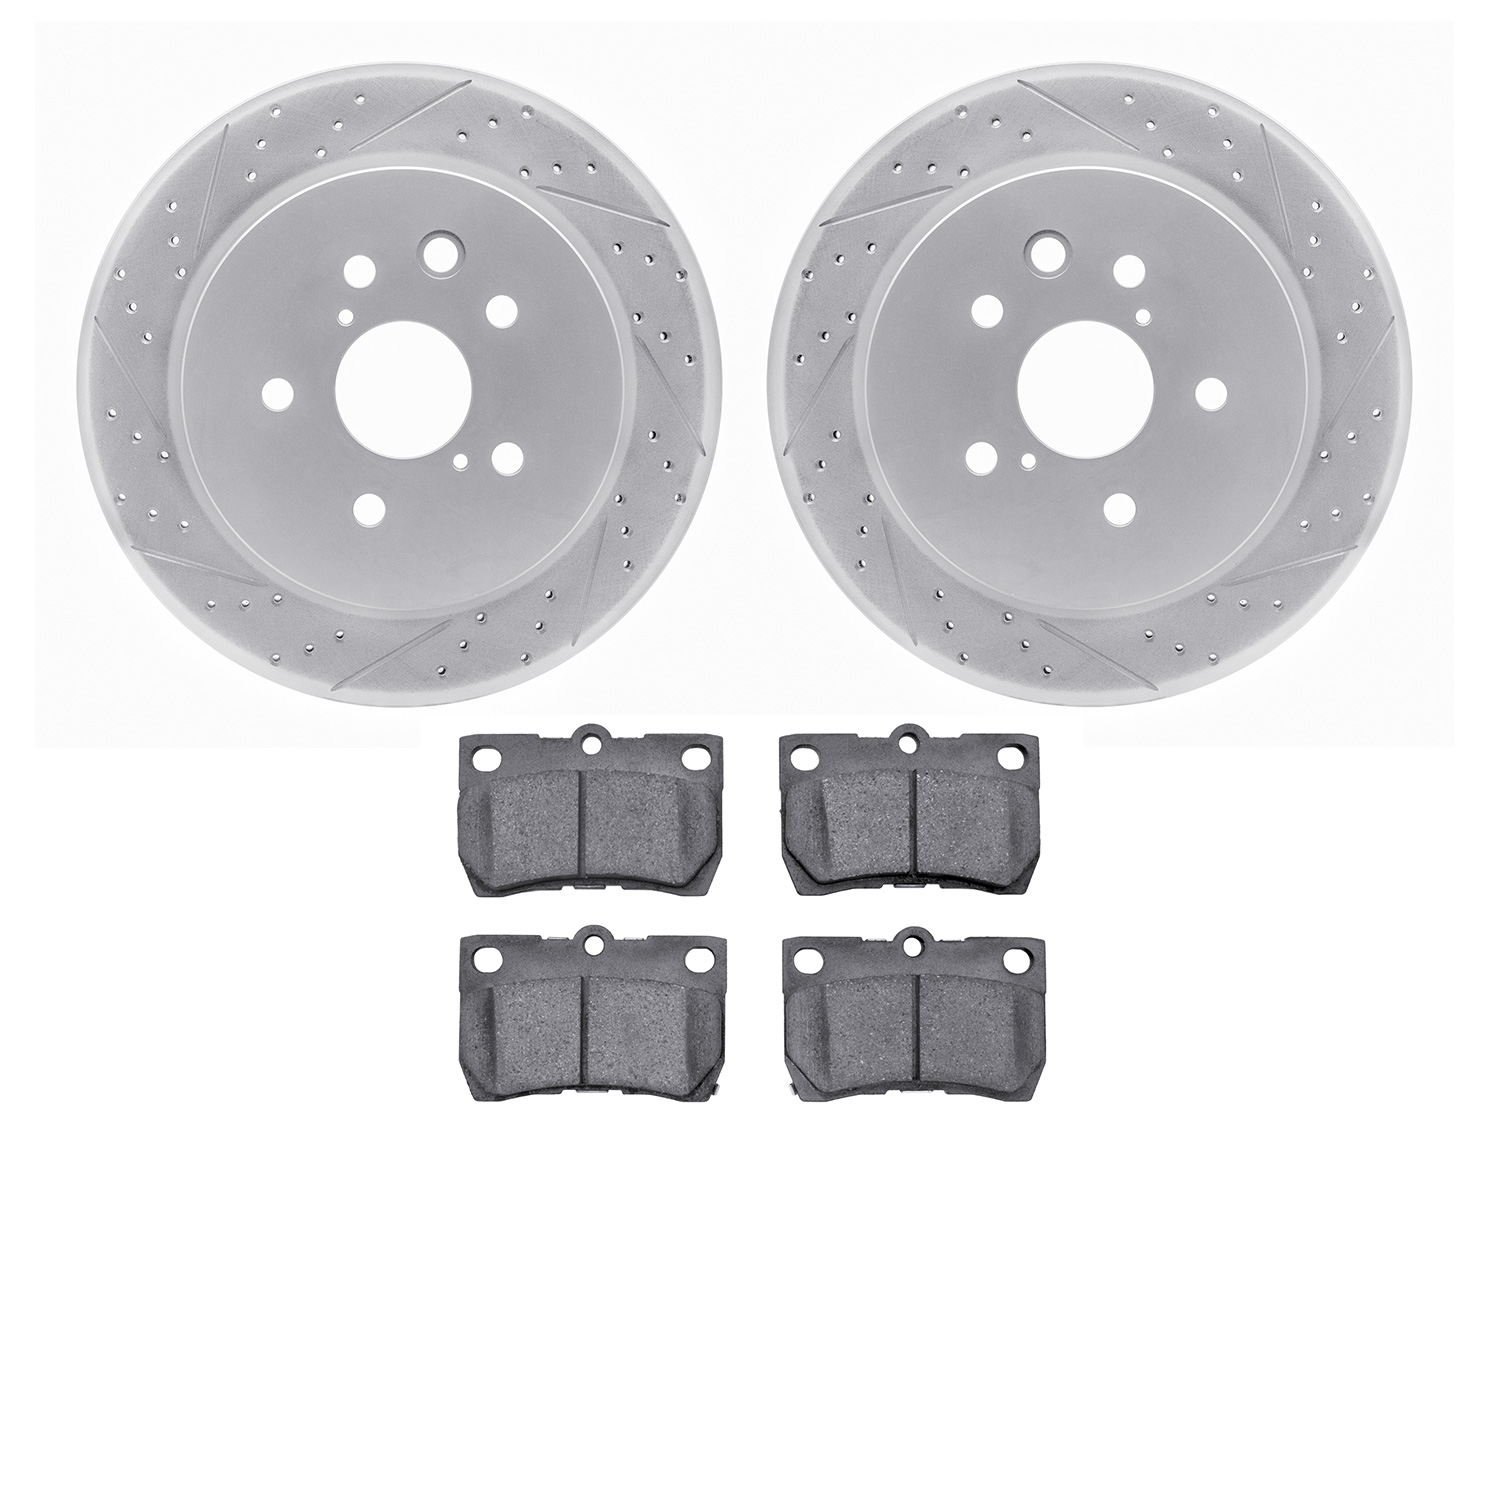 2502-75009 Geoperformance Drilled/Slotted Rotors w/5000 Advanced Brake Pads Kit, 2006-2013 Lexus/Toyota/Scion, Position: Rear